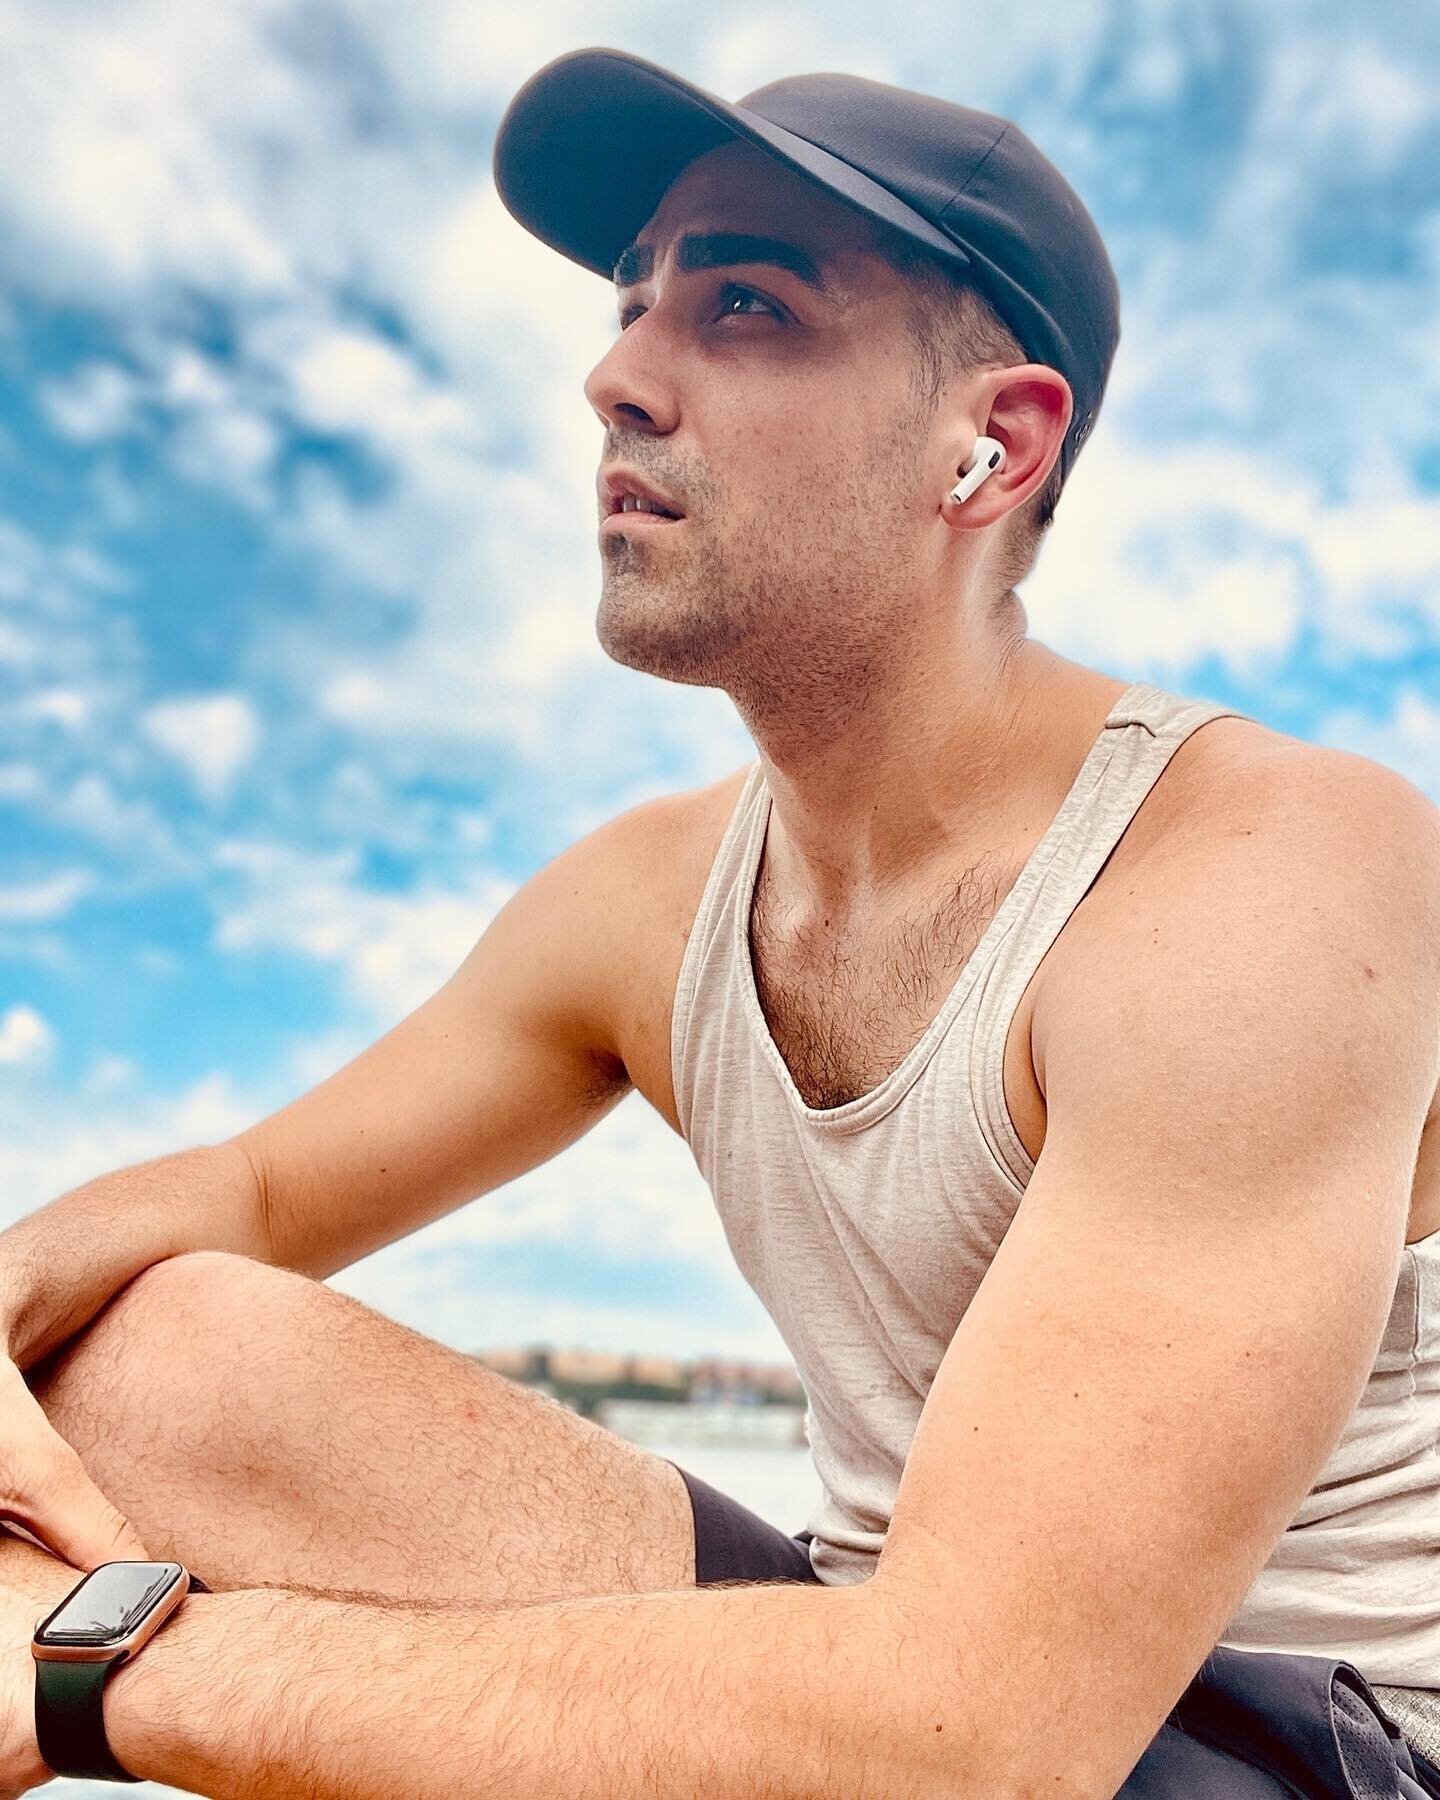 Hitting a run and trying out this meditation thing. ⁠